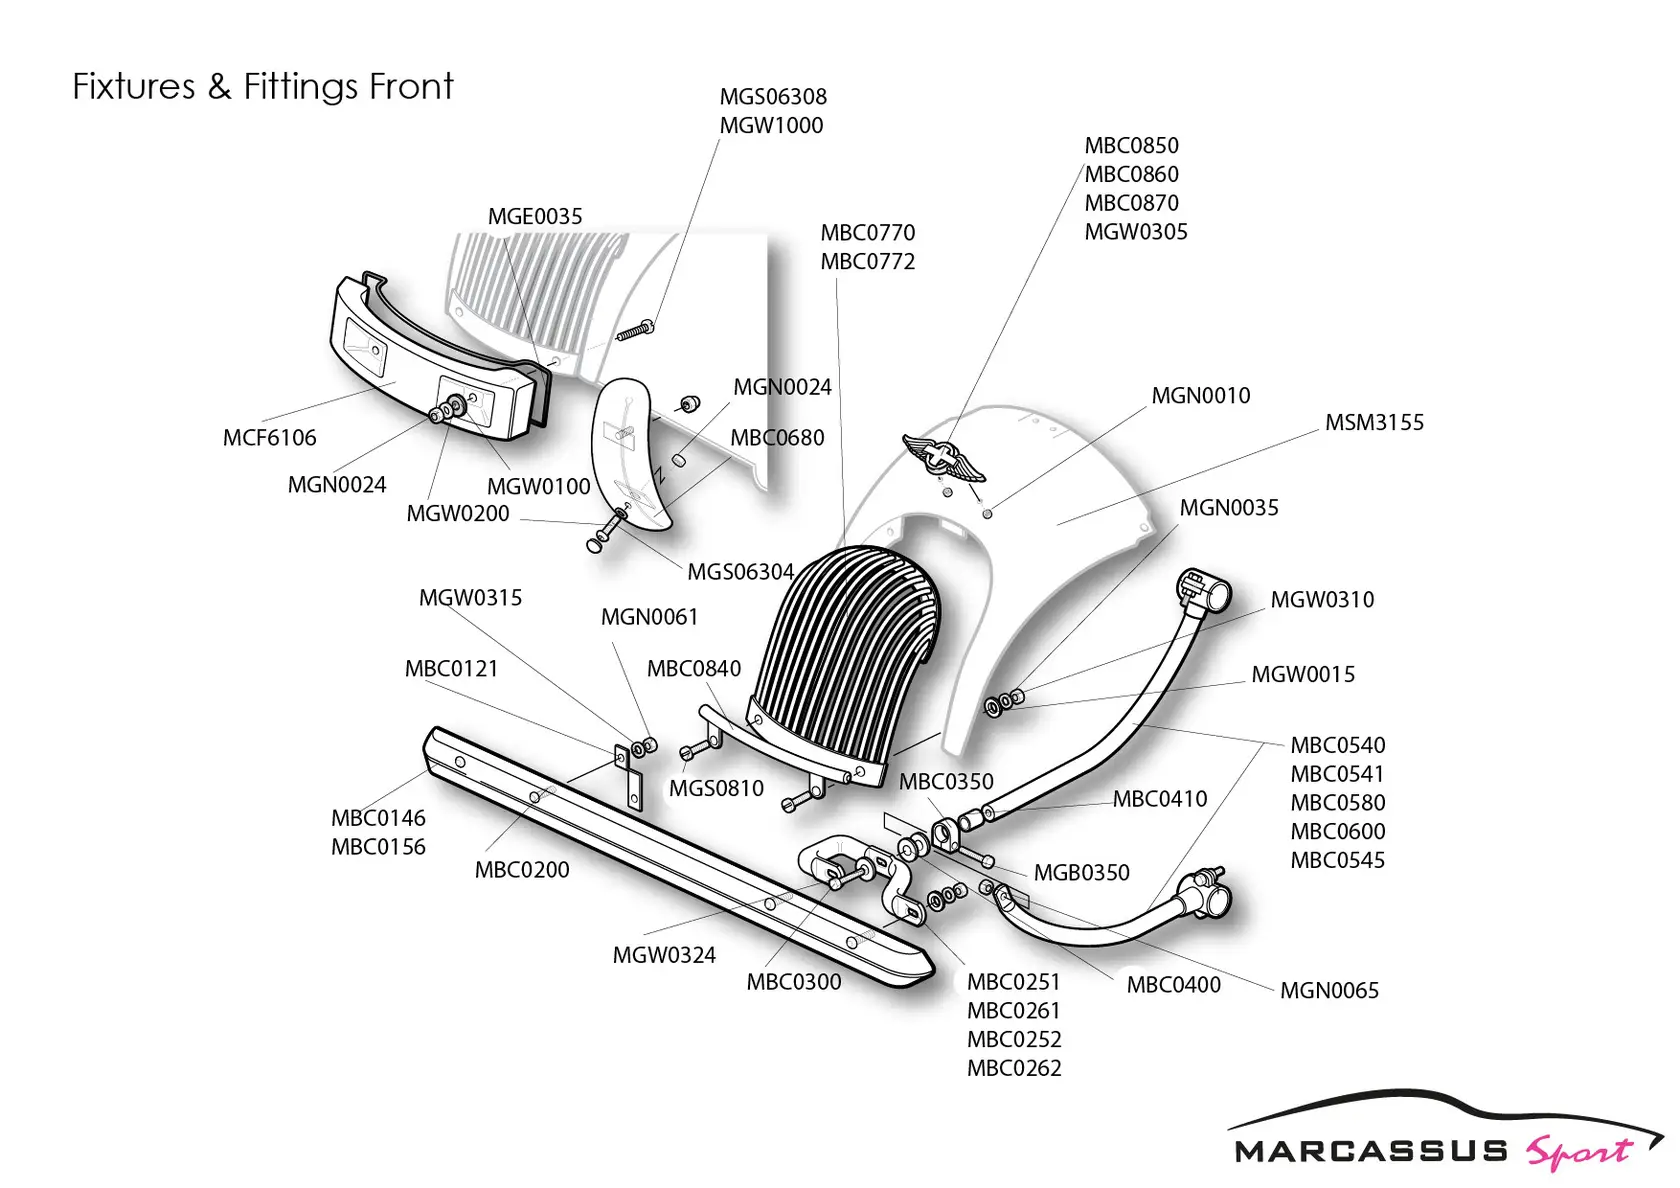 Fixtures & Fittings Front-01.jpg